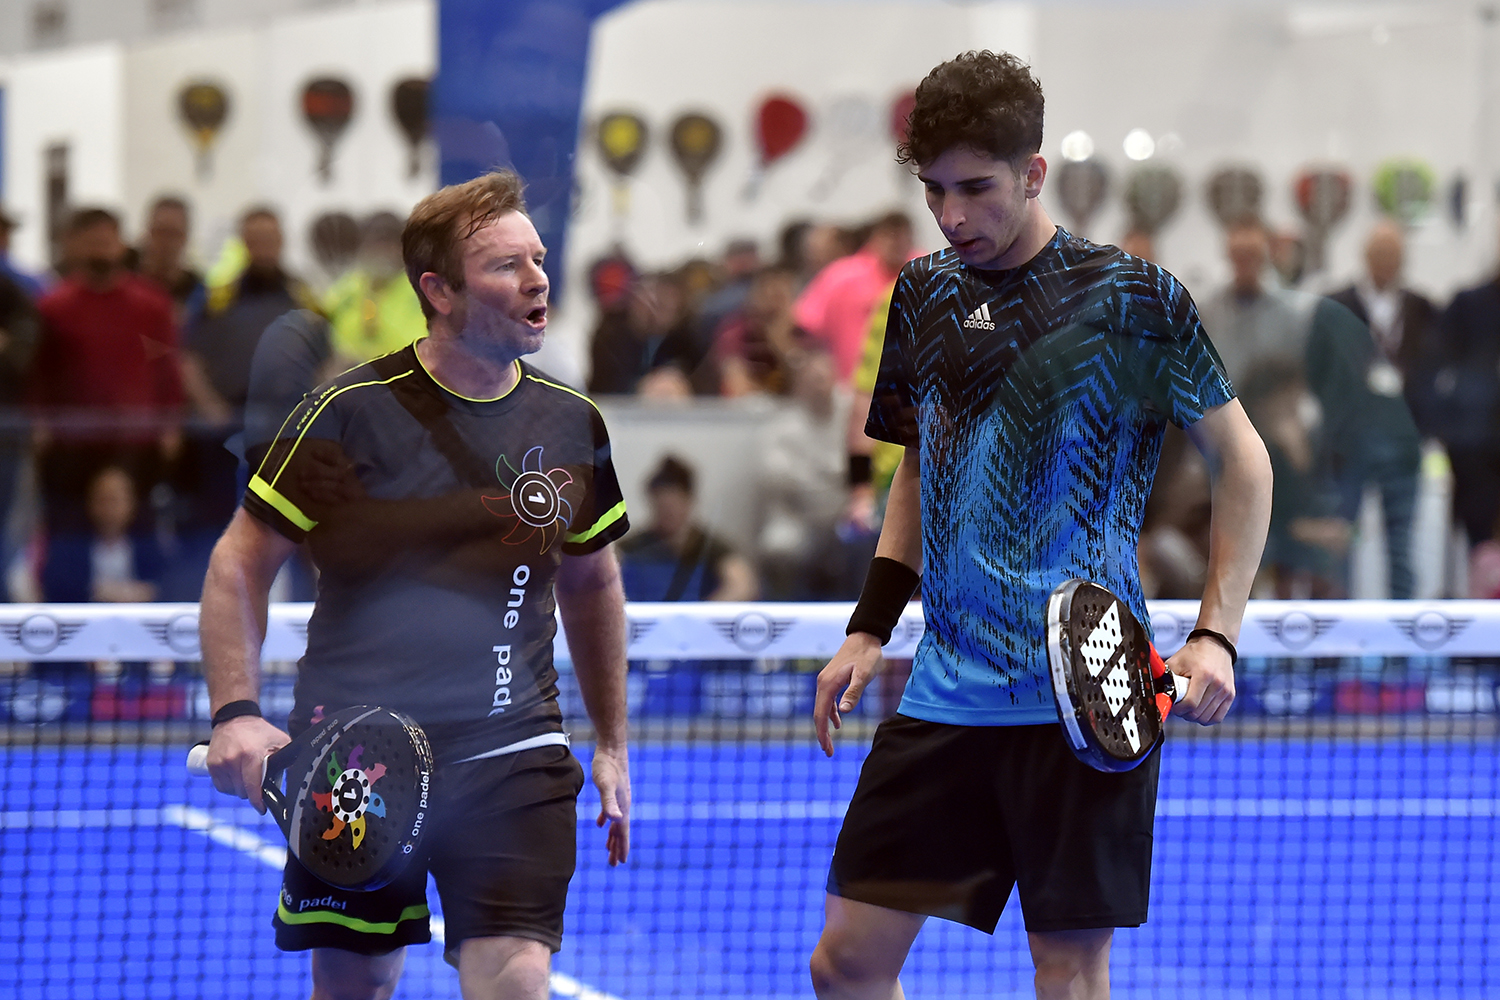 WPT: the tables of Vienna Padel open